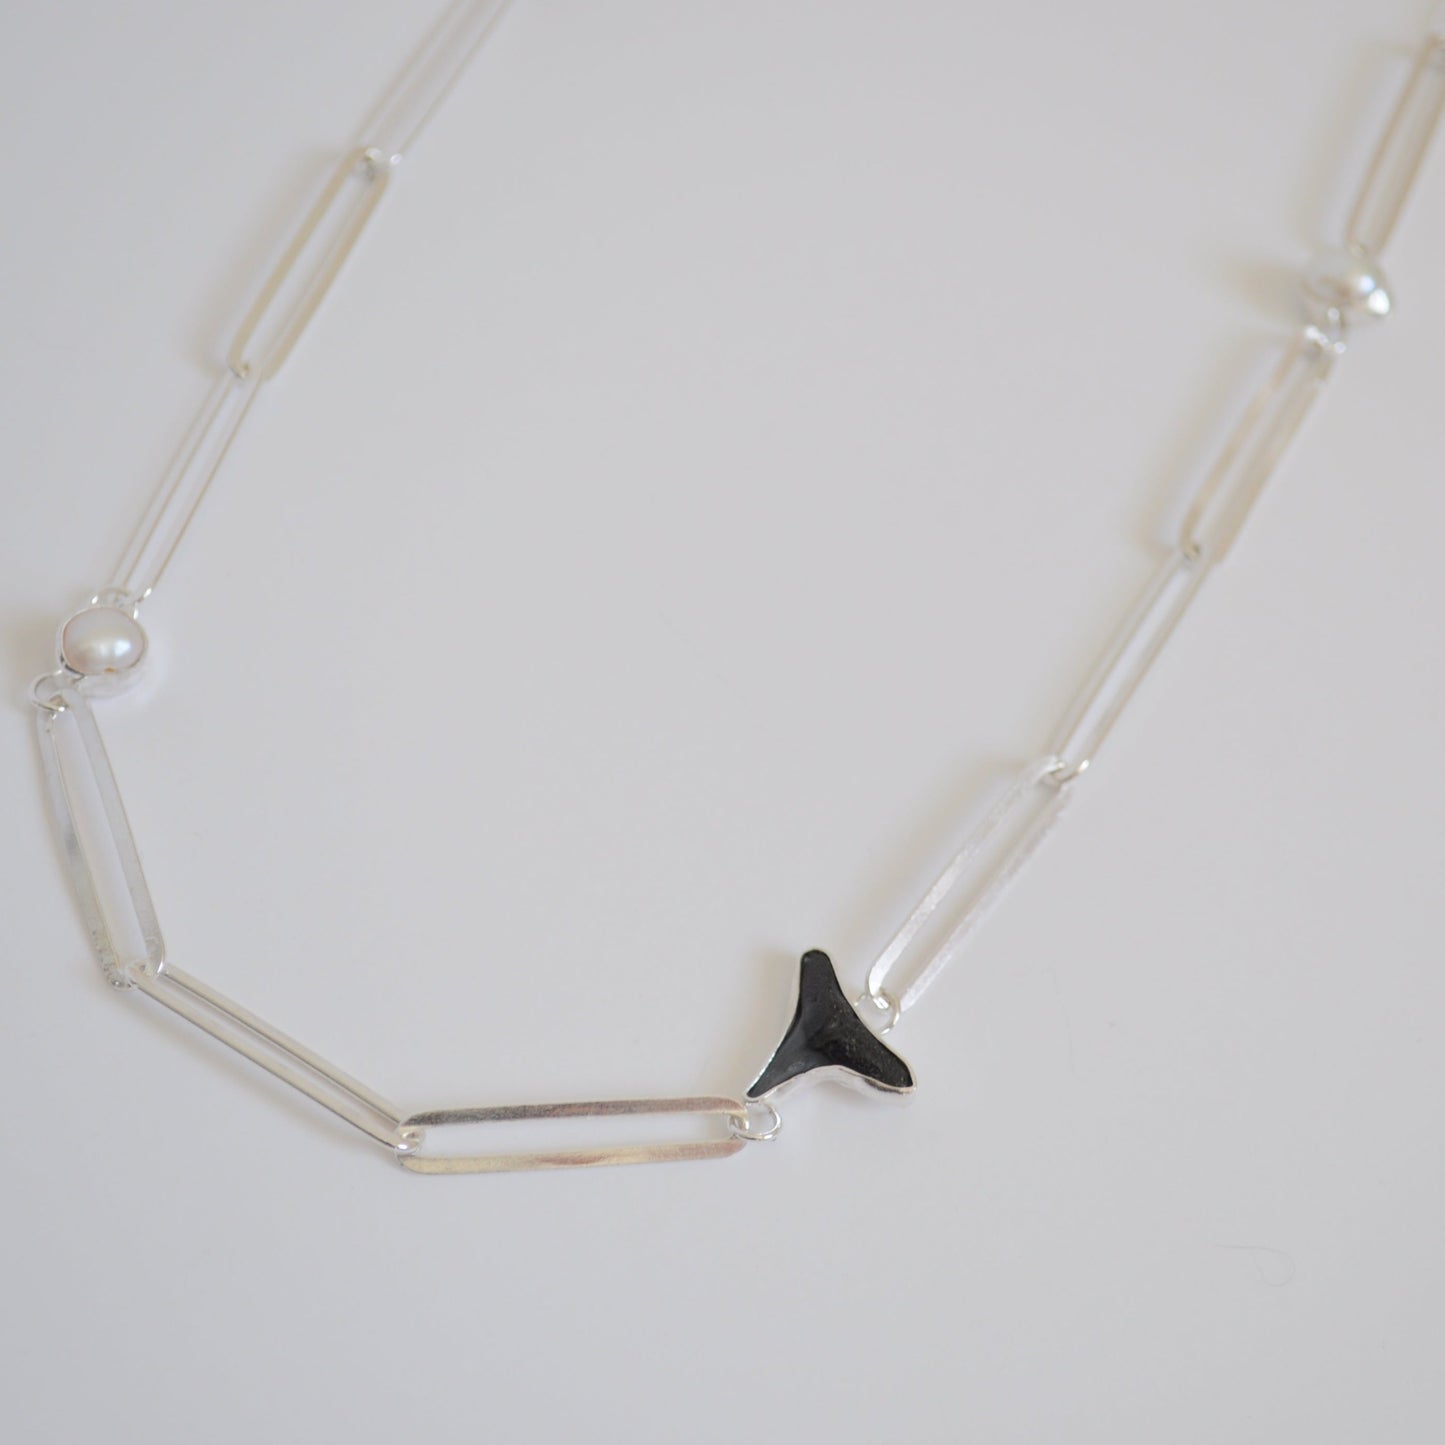 Shark and Pearl Paperclip Necklace